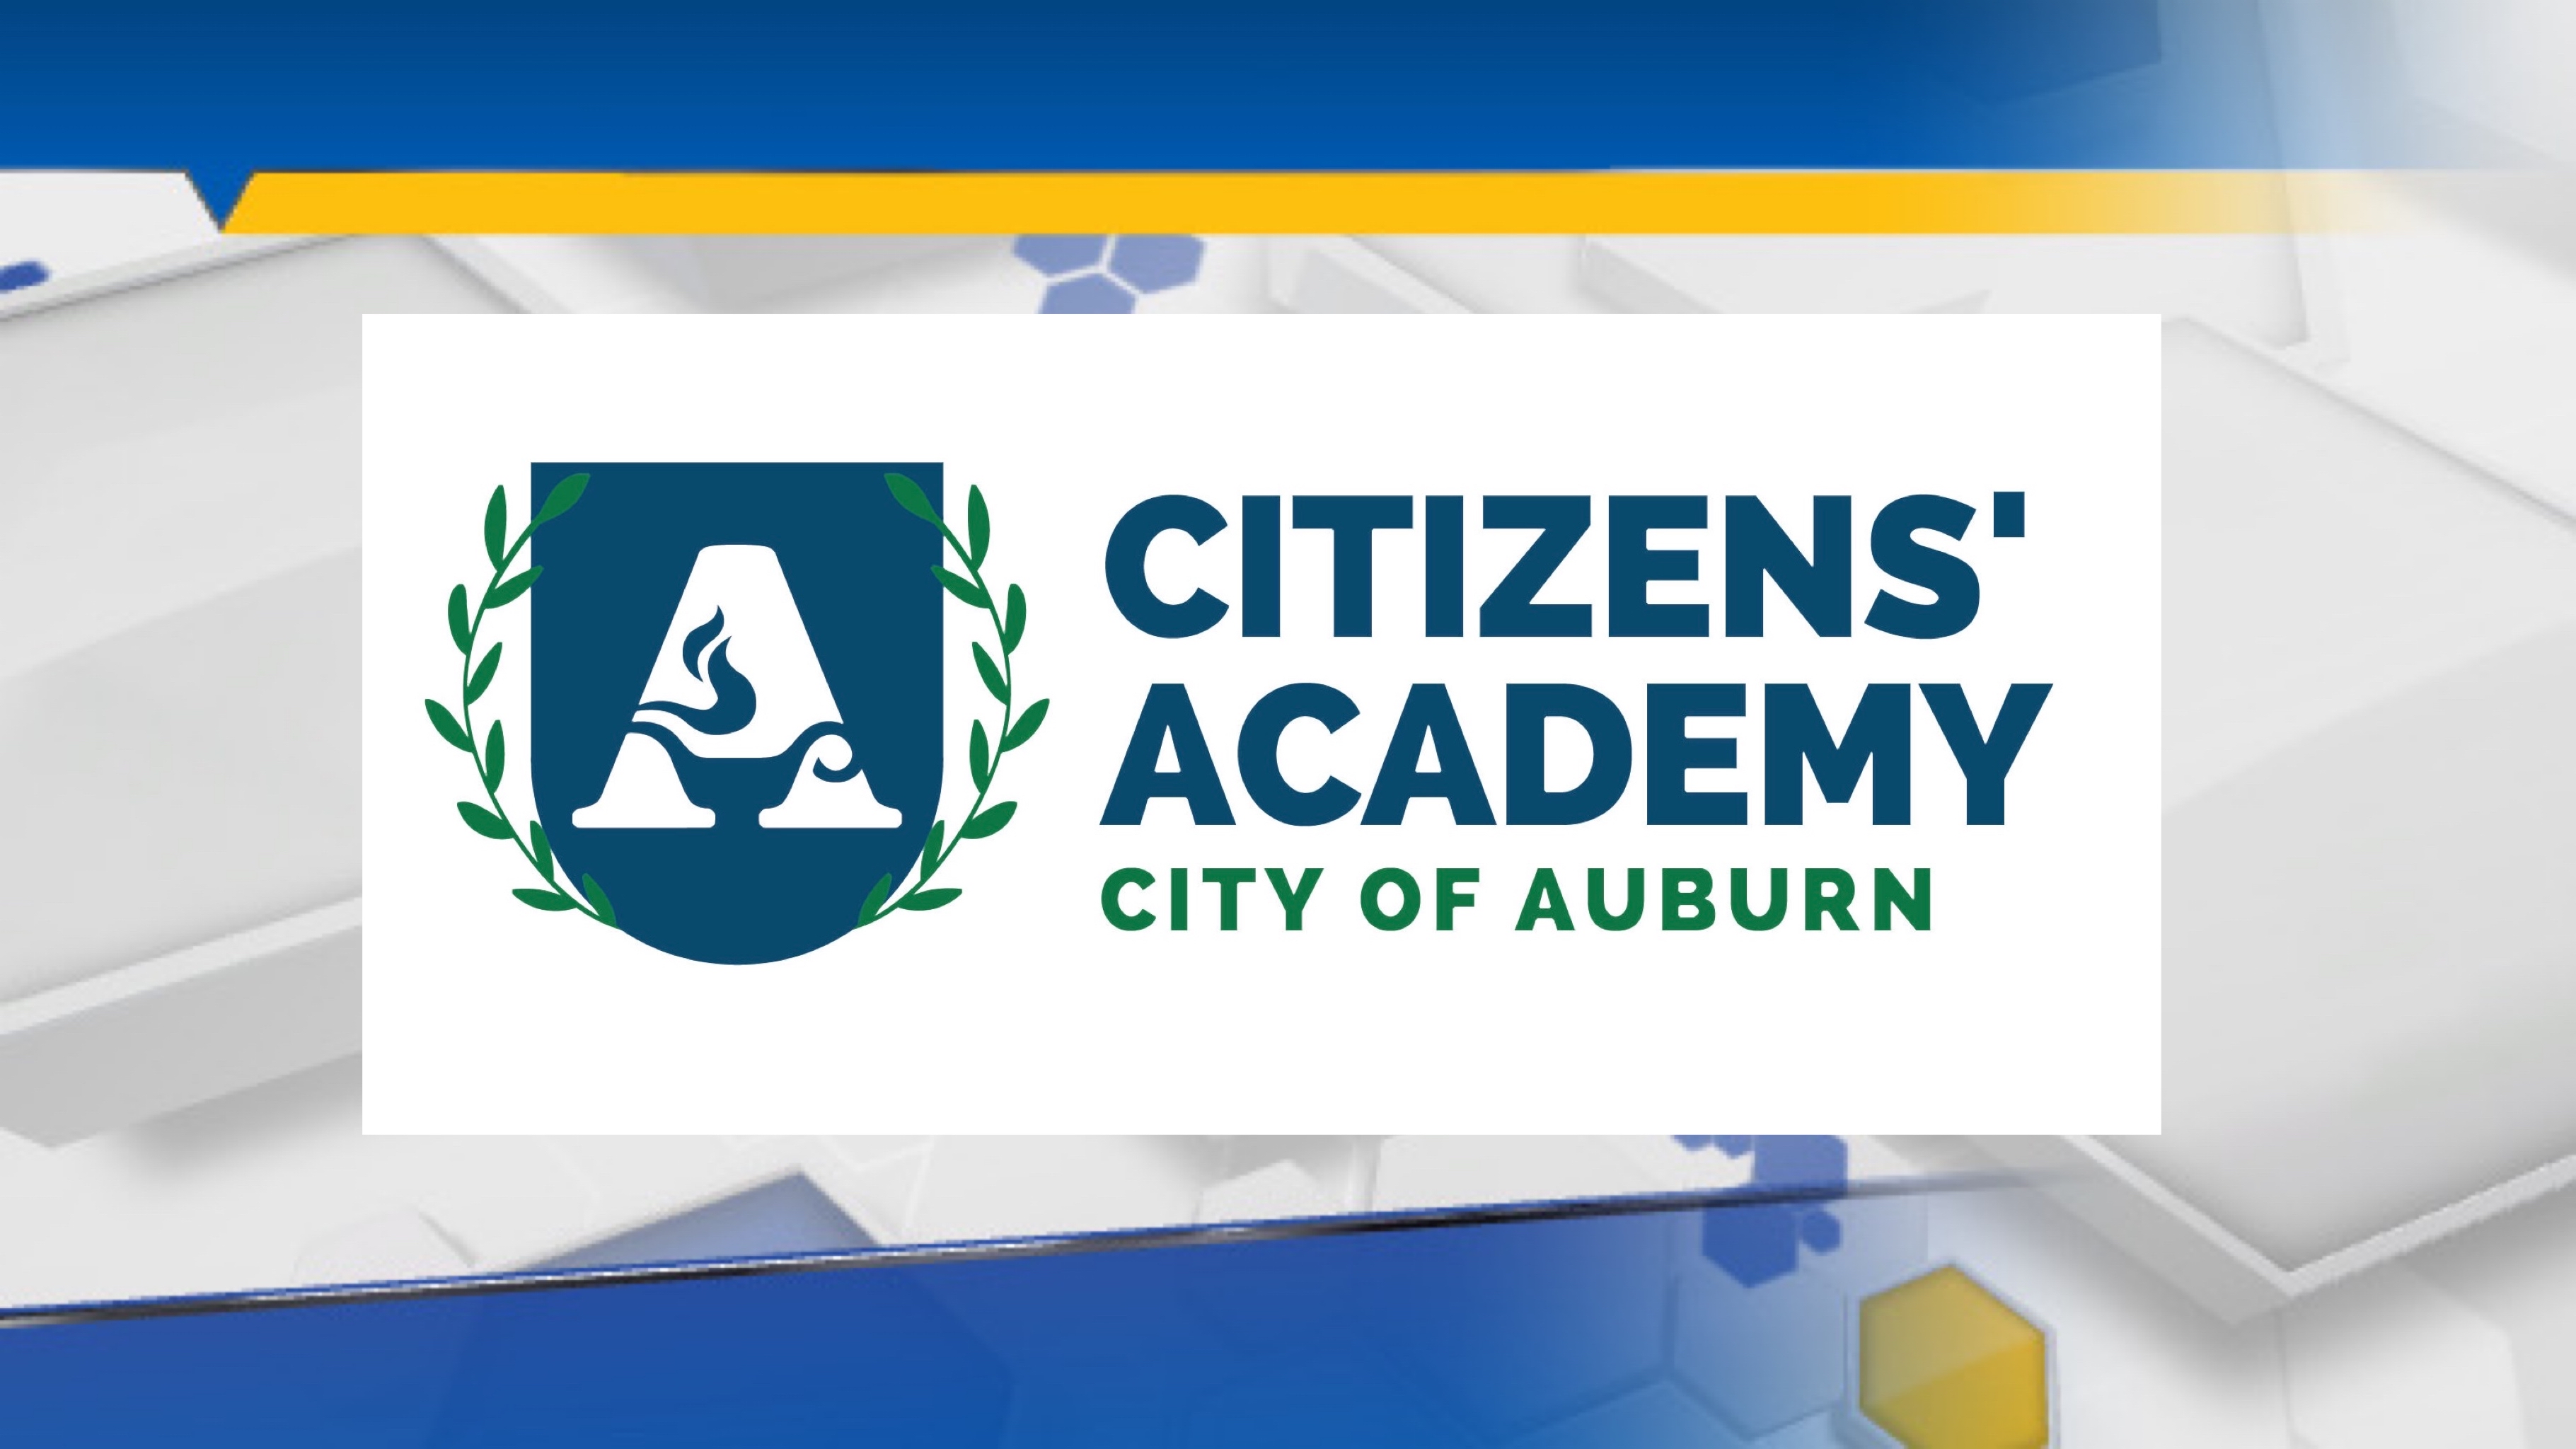 Auburn residents offered Public Safety and Citizens' academies